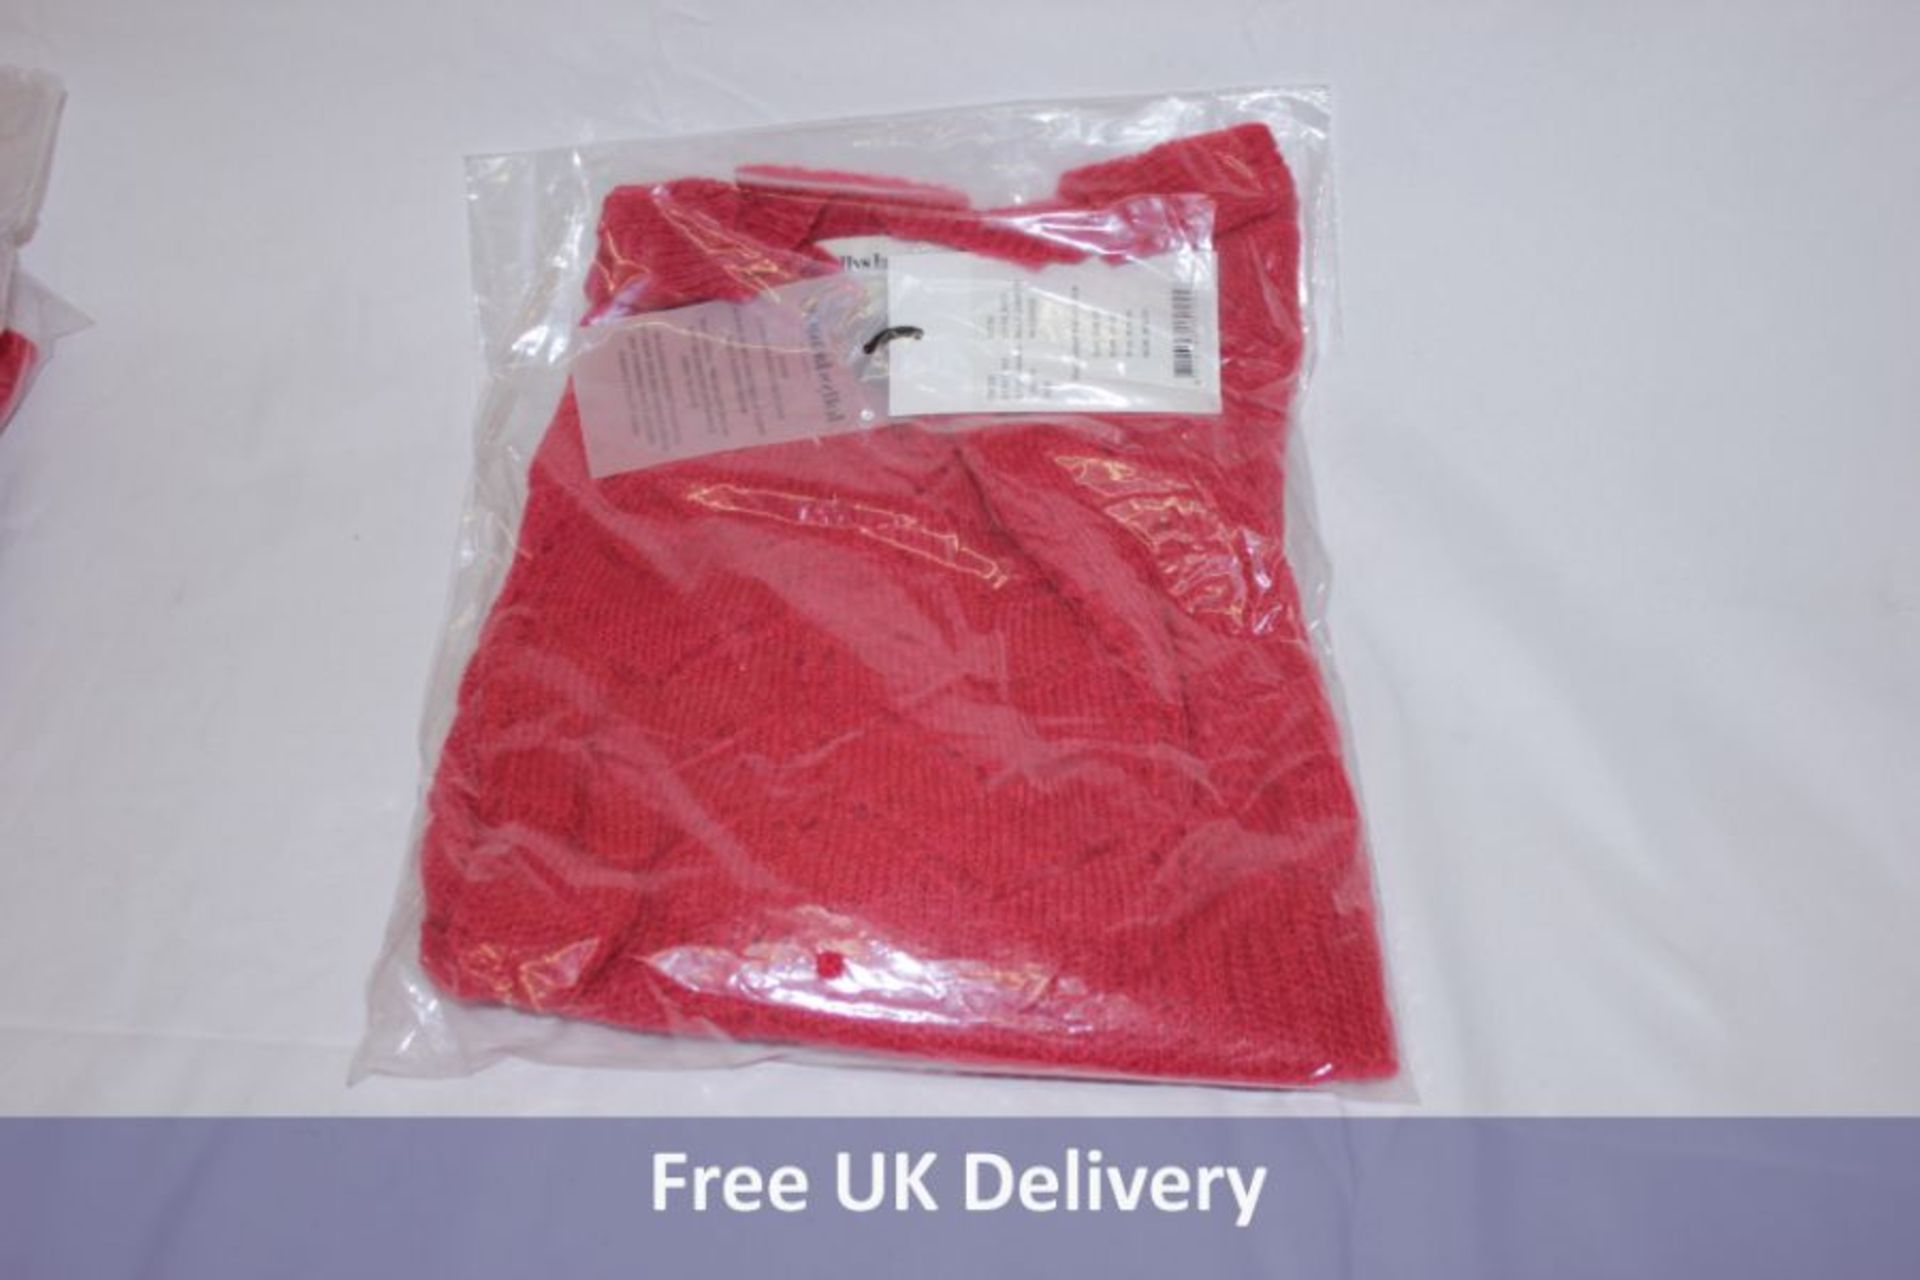 Four Lollys Laundry Billy Jumpers, Cerise to include 1x XS, 1x S, 1x M and 1x L